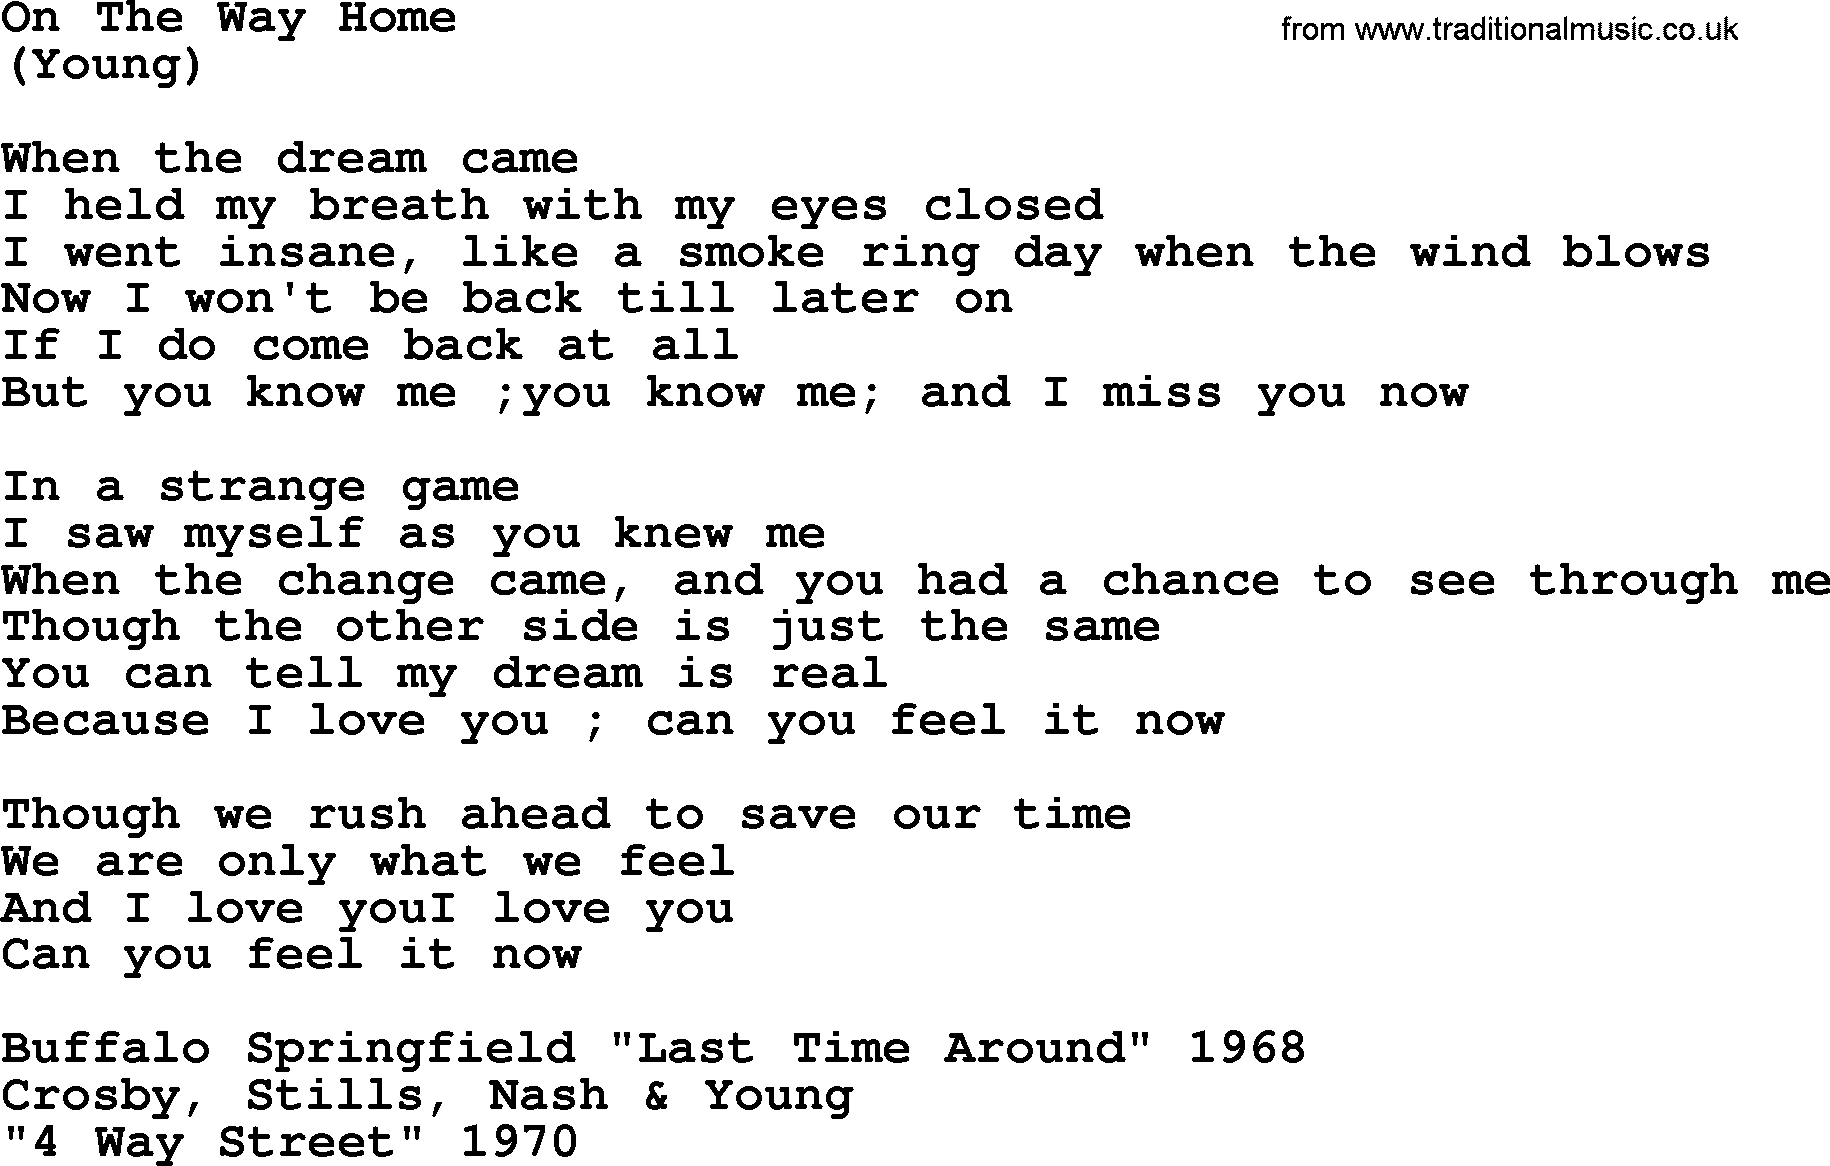 The Byrds song On The Way Home, lyrics